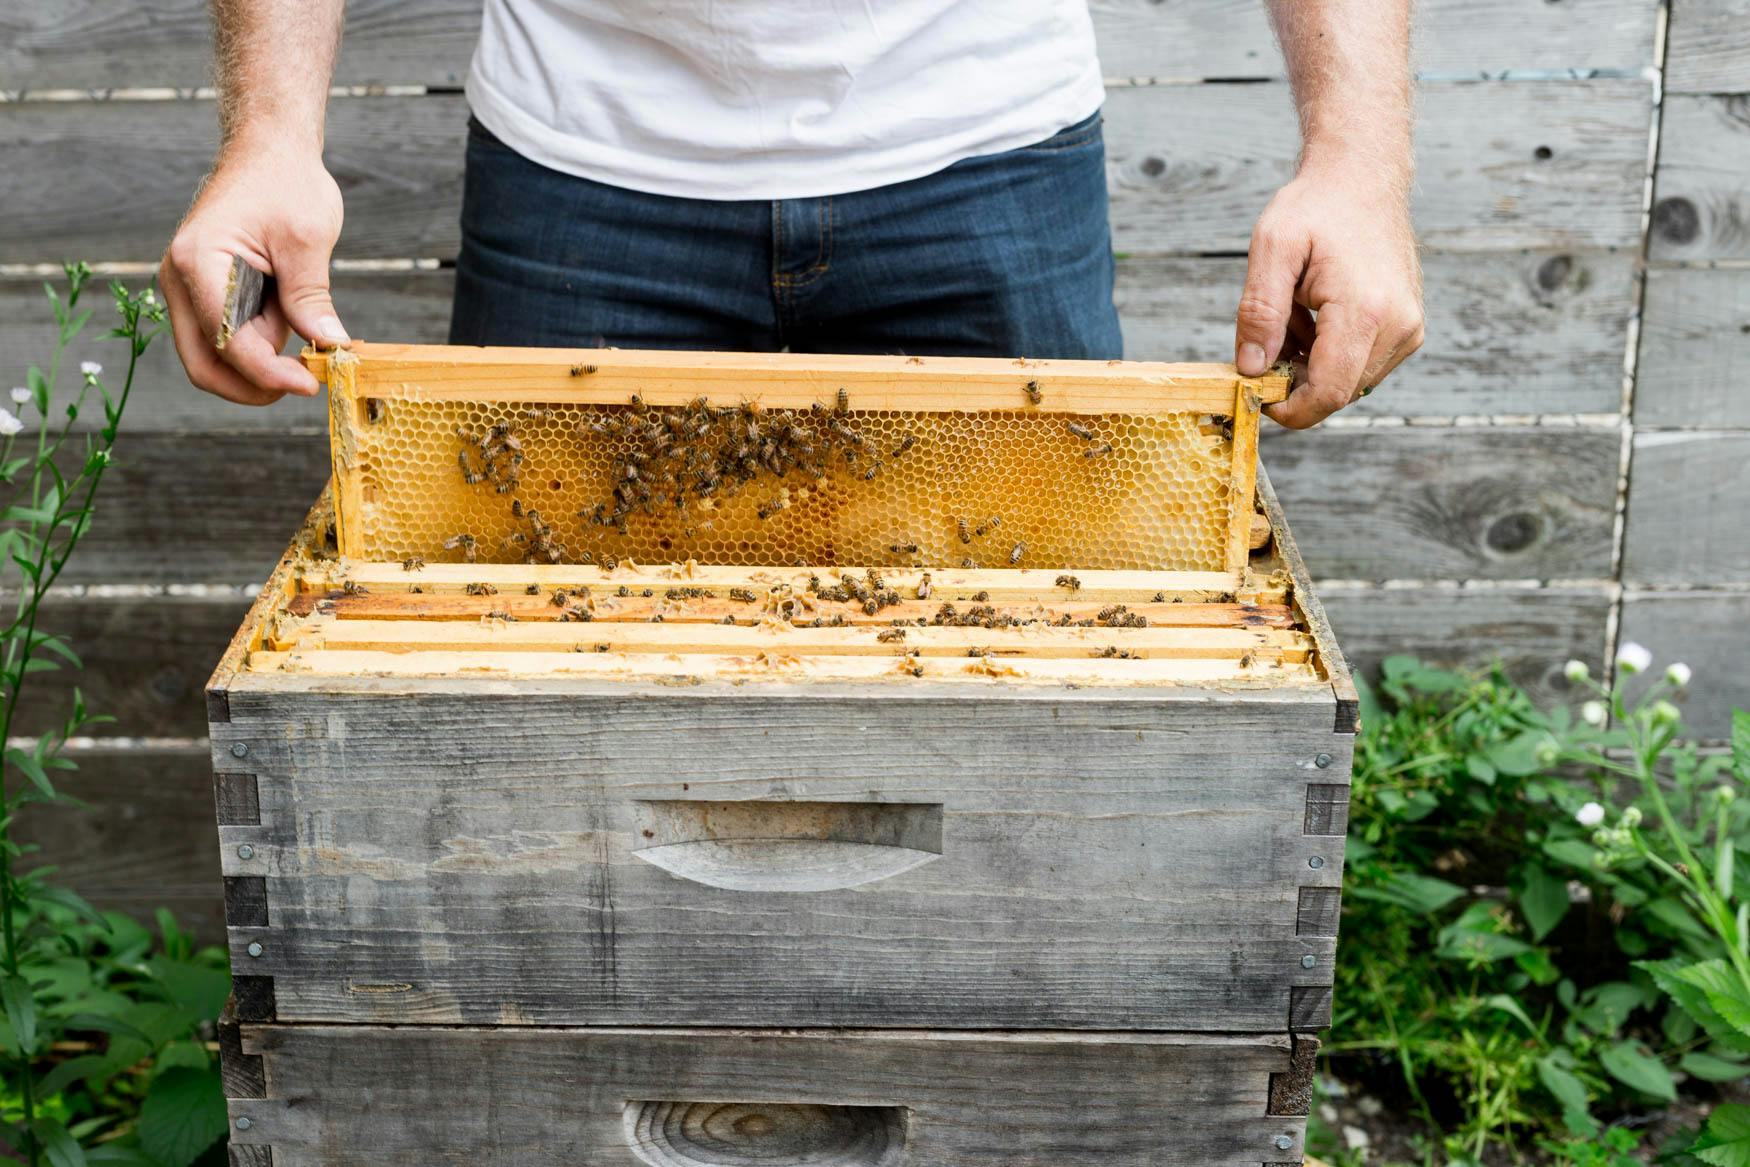 Live bee hive for fresh honey at a dinner party in Chicago, IL | PartySlate